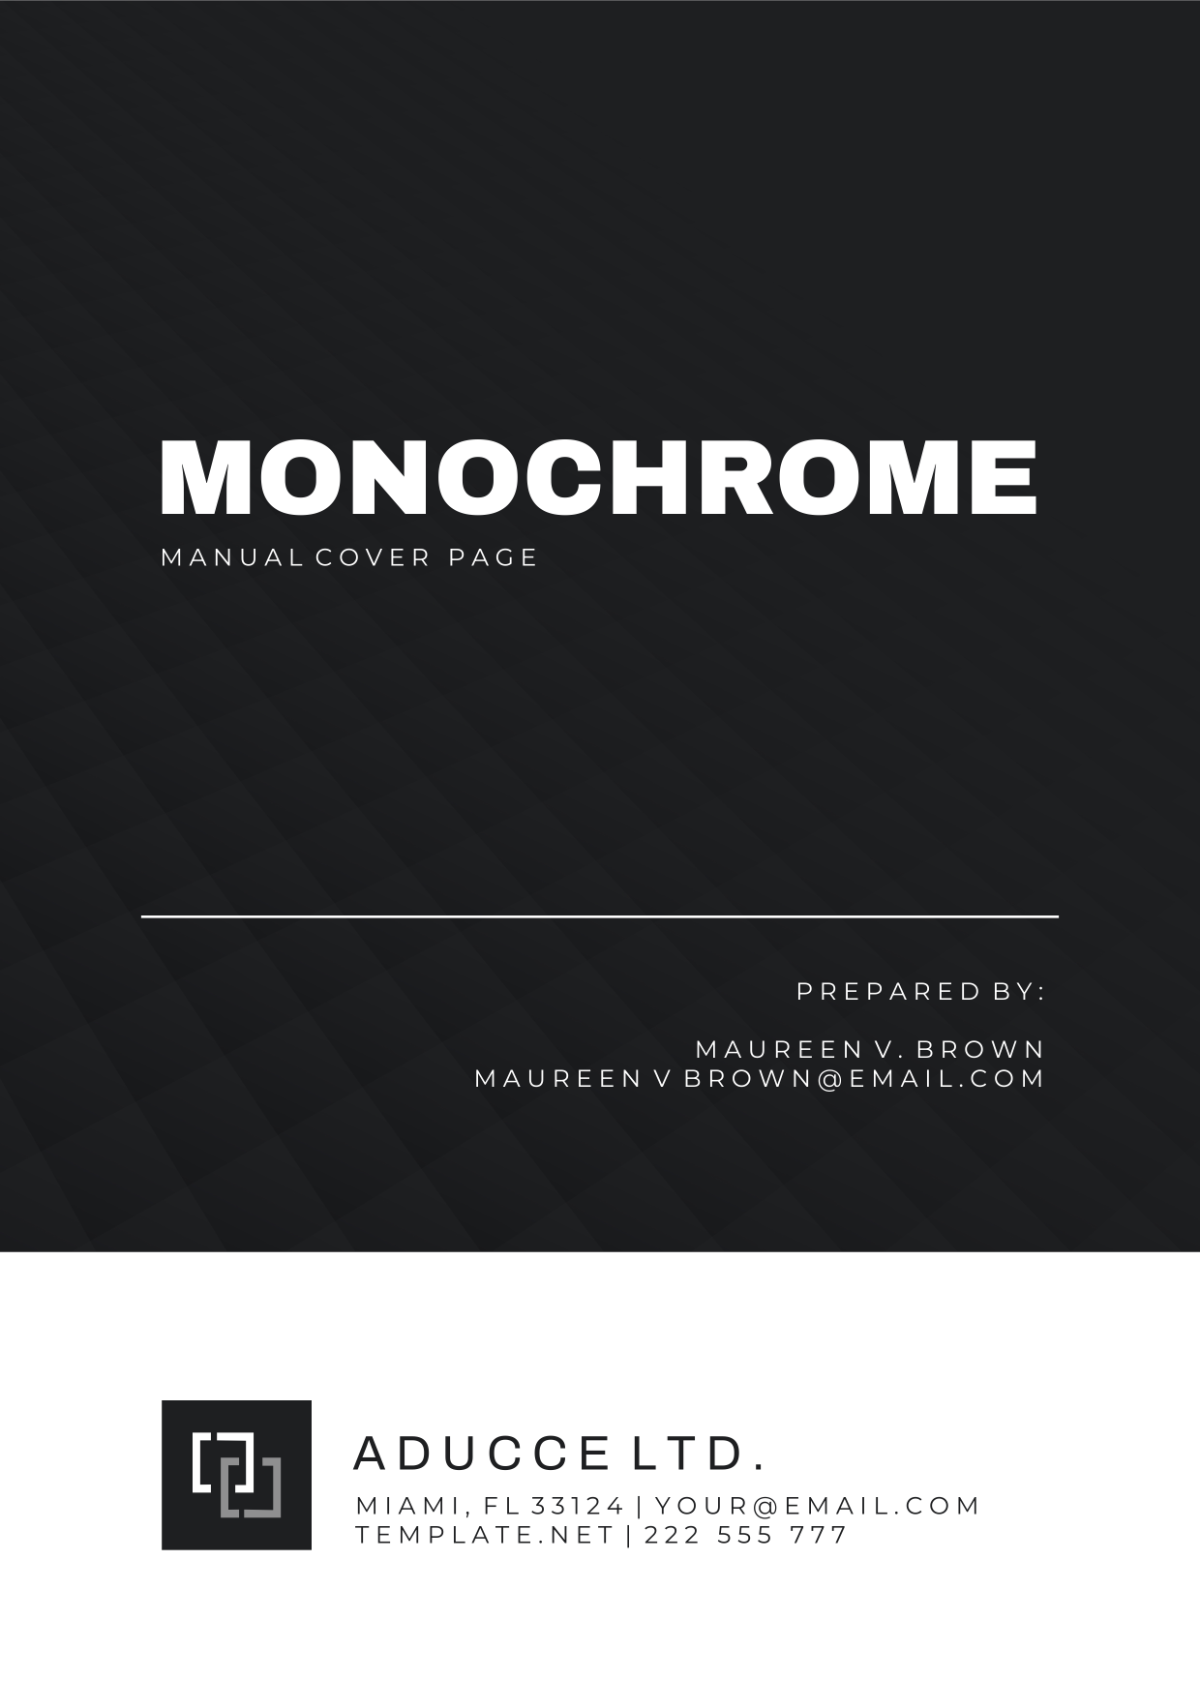 Monochrome Manual Cover Page